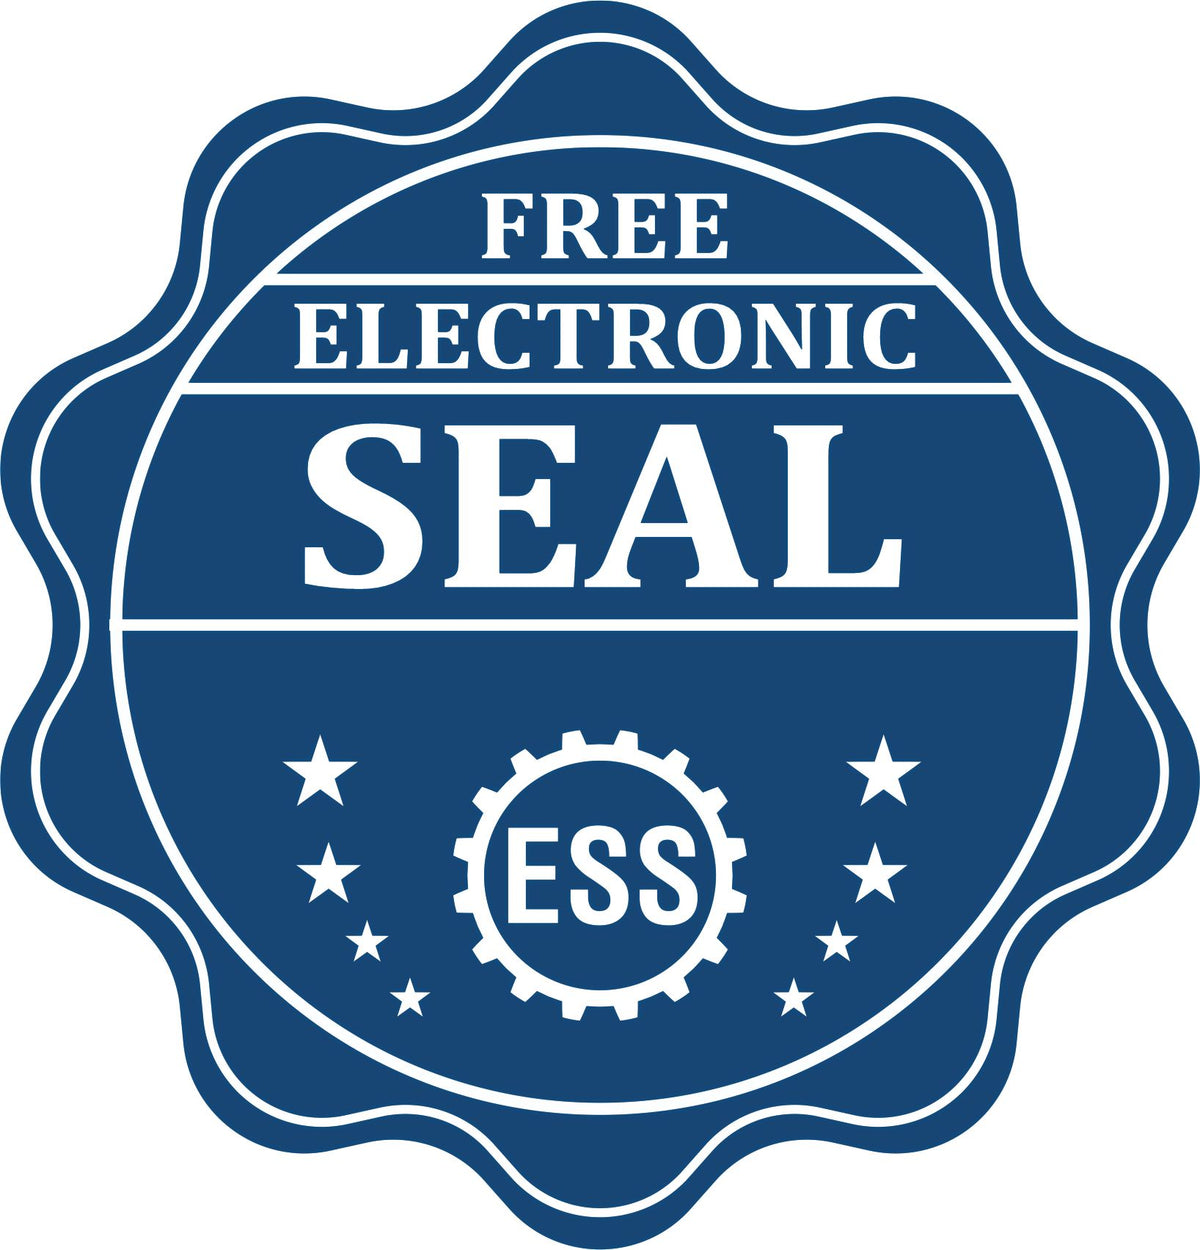 A badge showing a free electronic seal for the Gift Missouri Geologist Seal with stars and the ESS gear on the emblem.